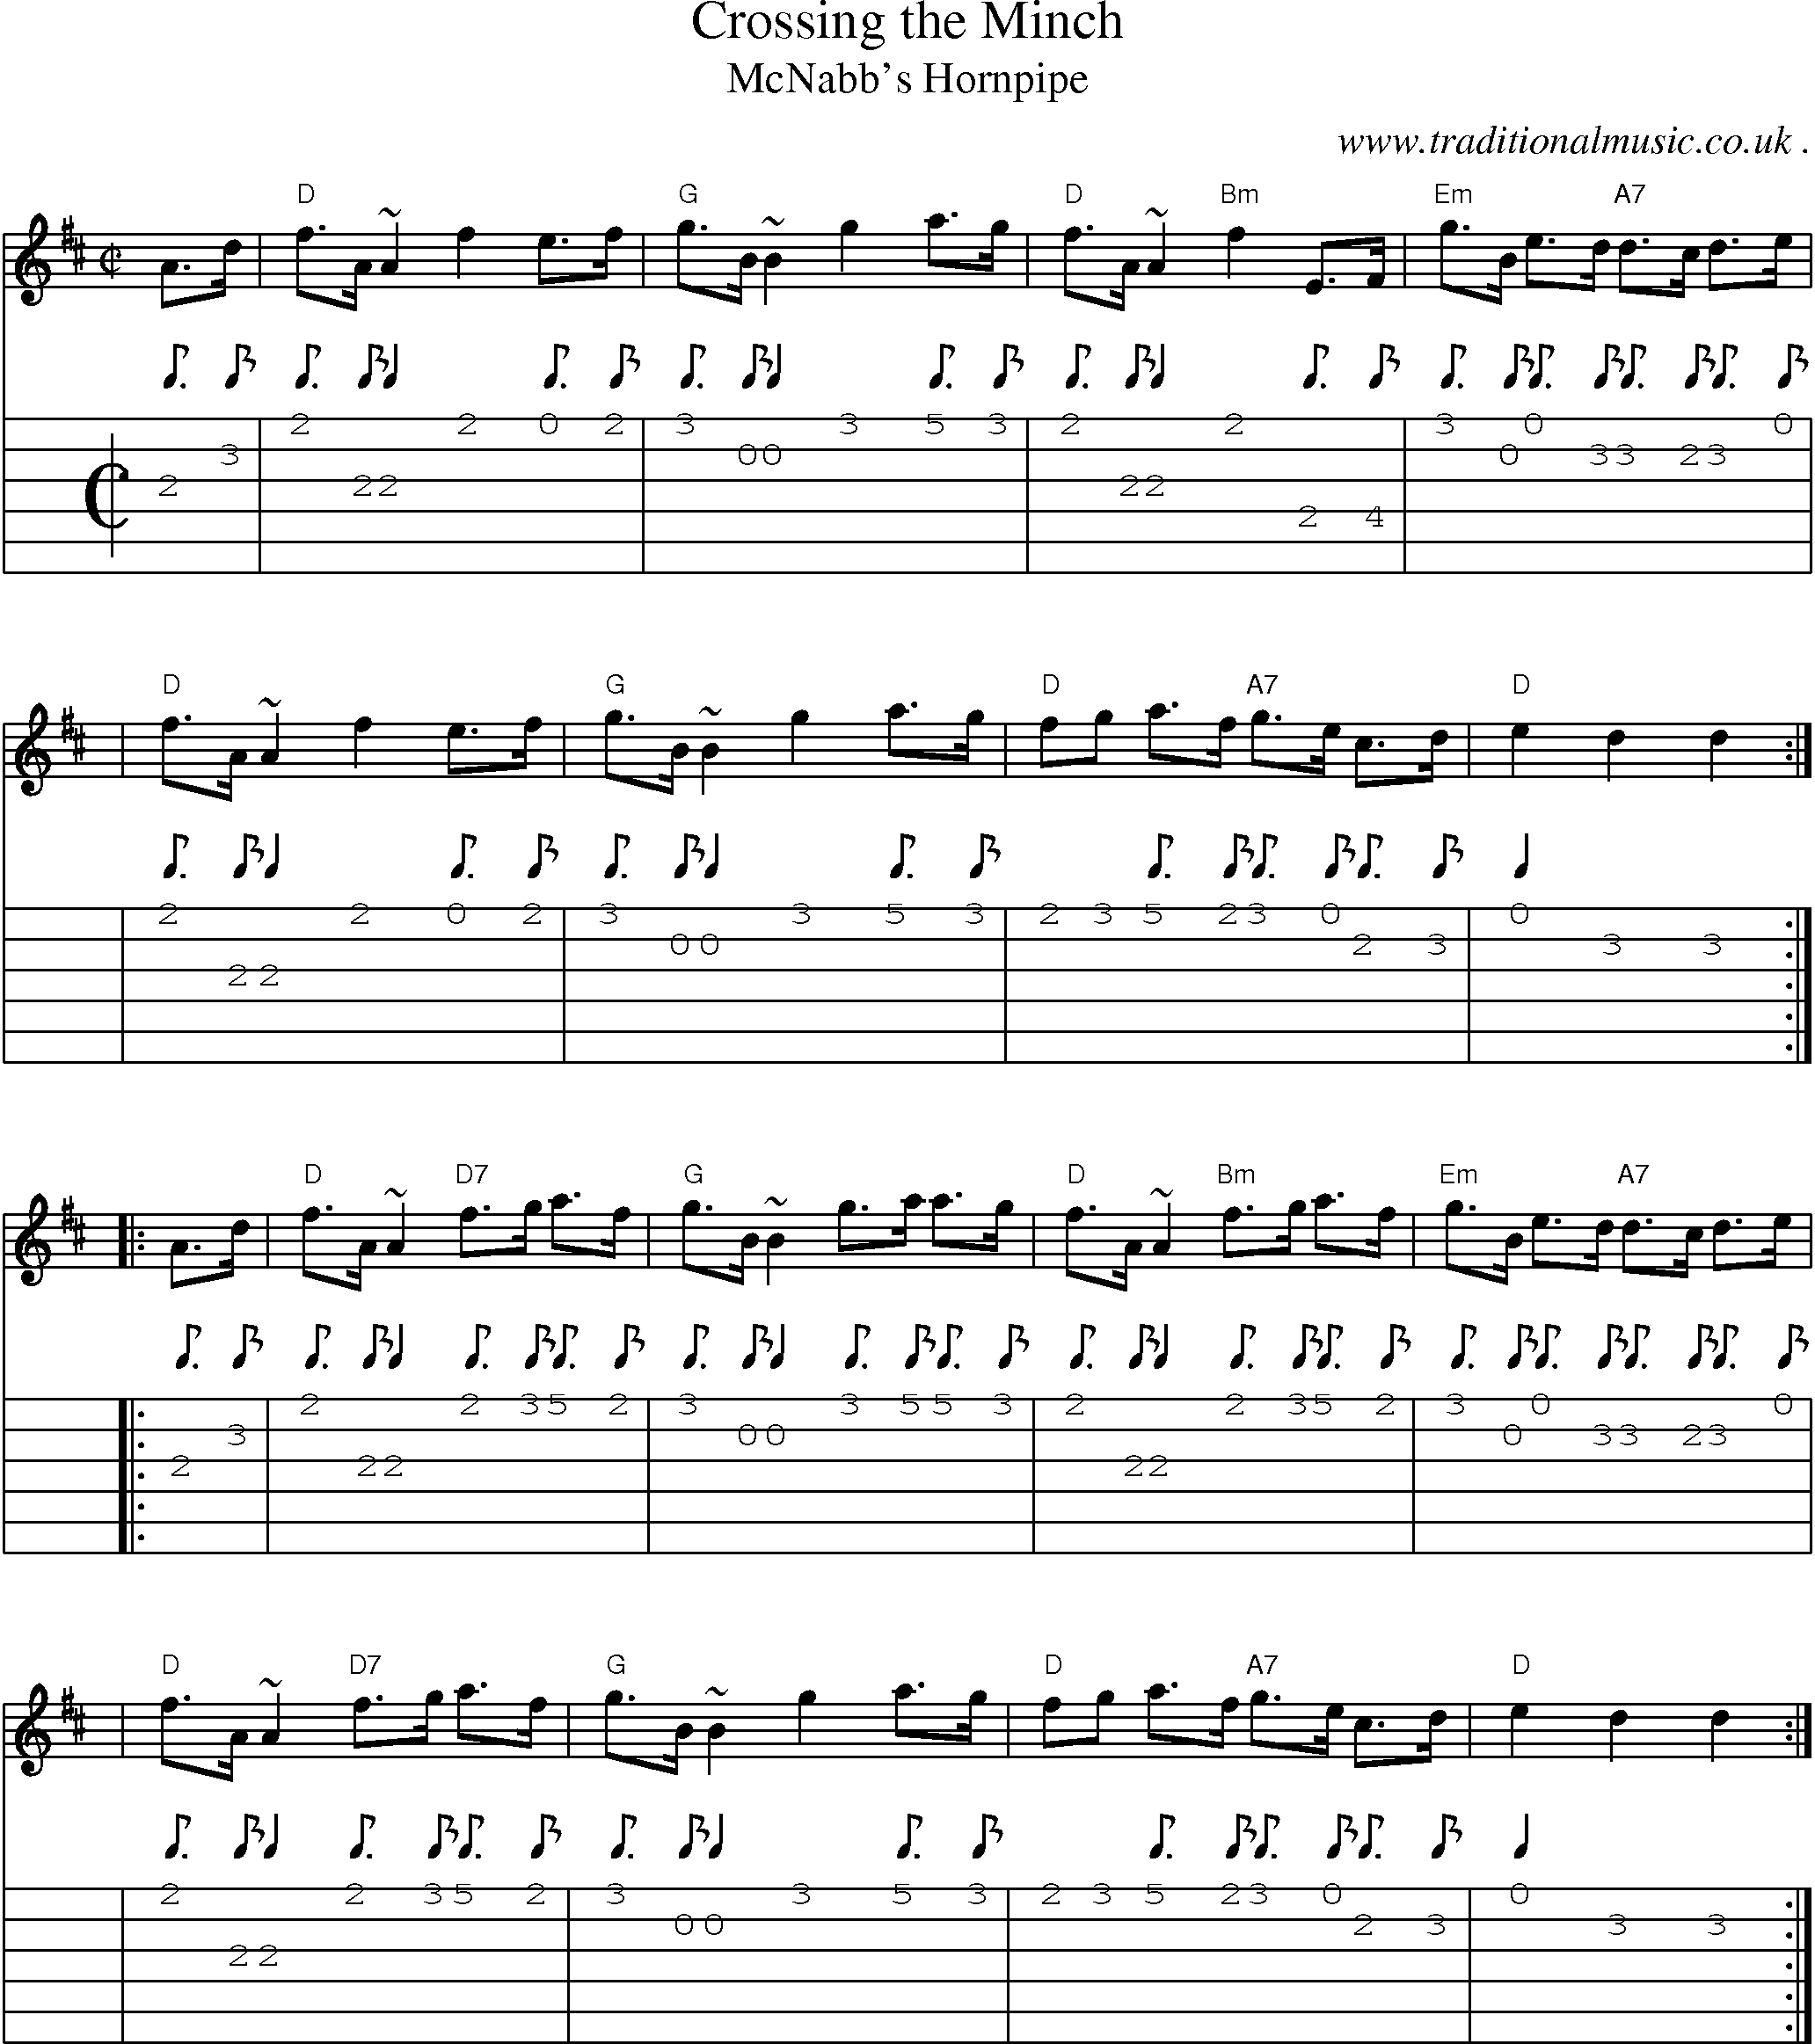 Sheet-music  score, Chords and Guitar Tabs for Crossing The Minch